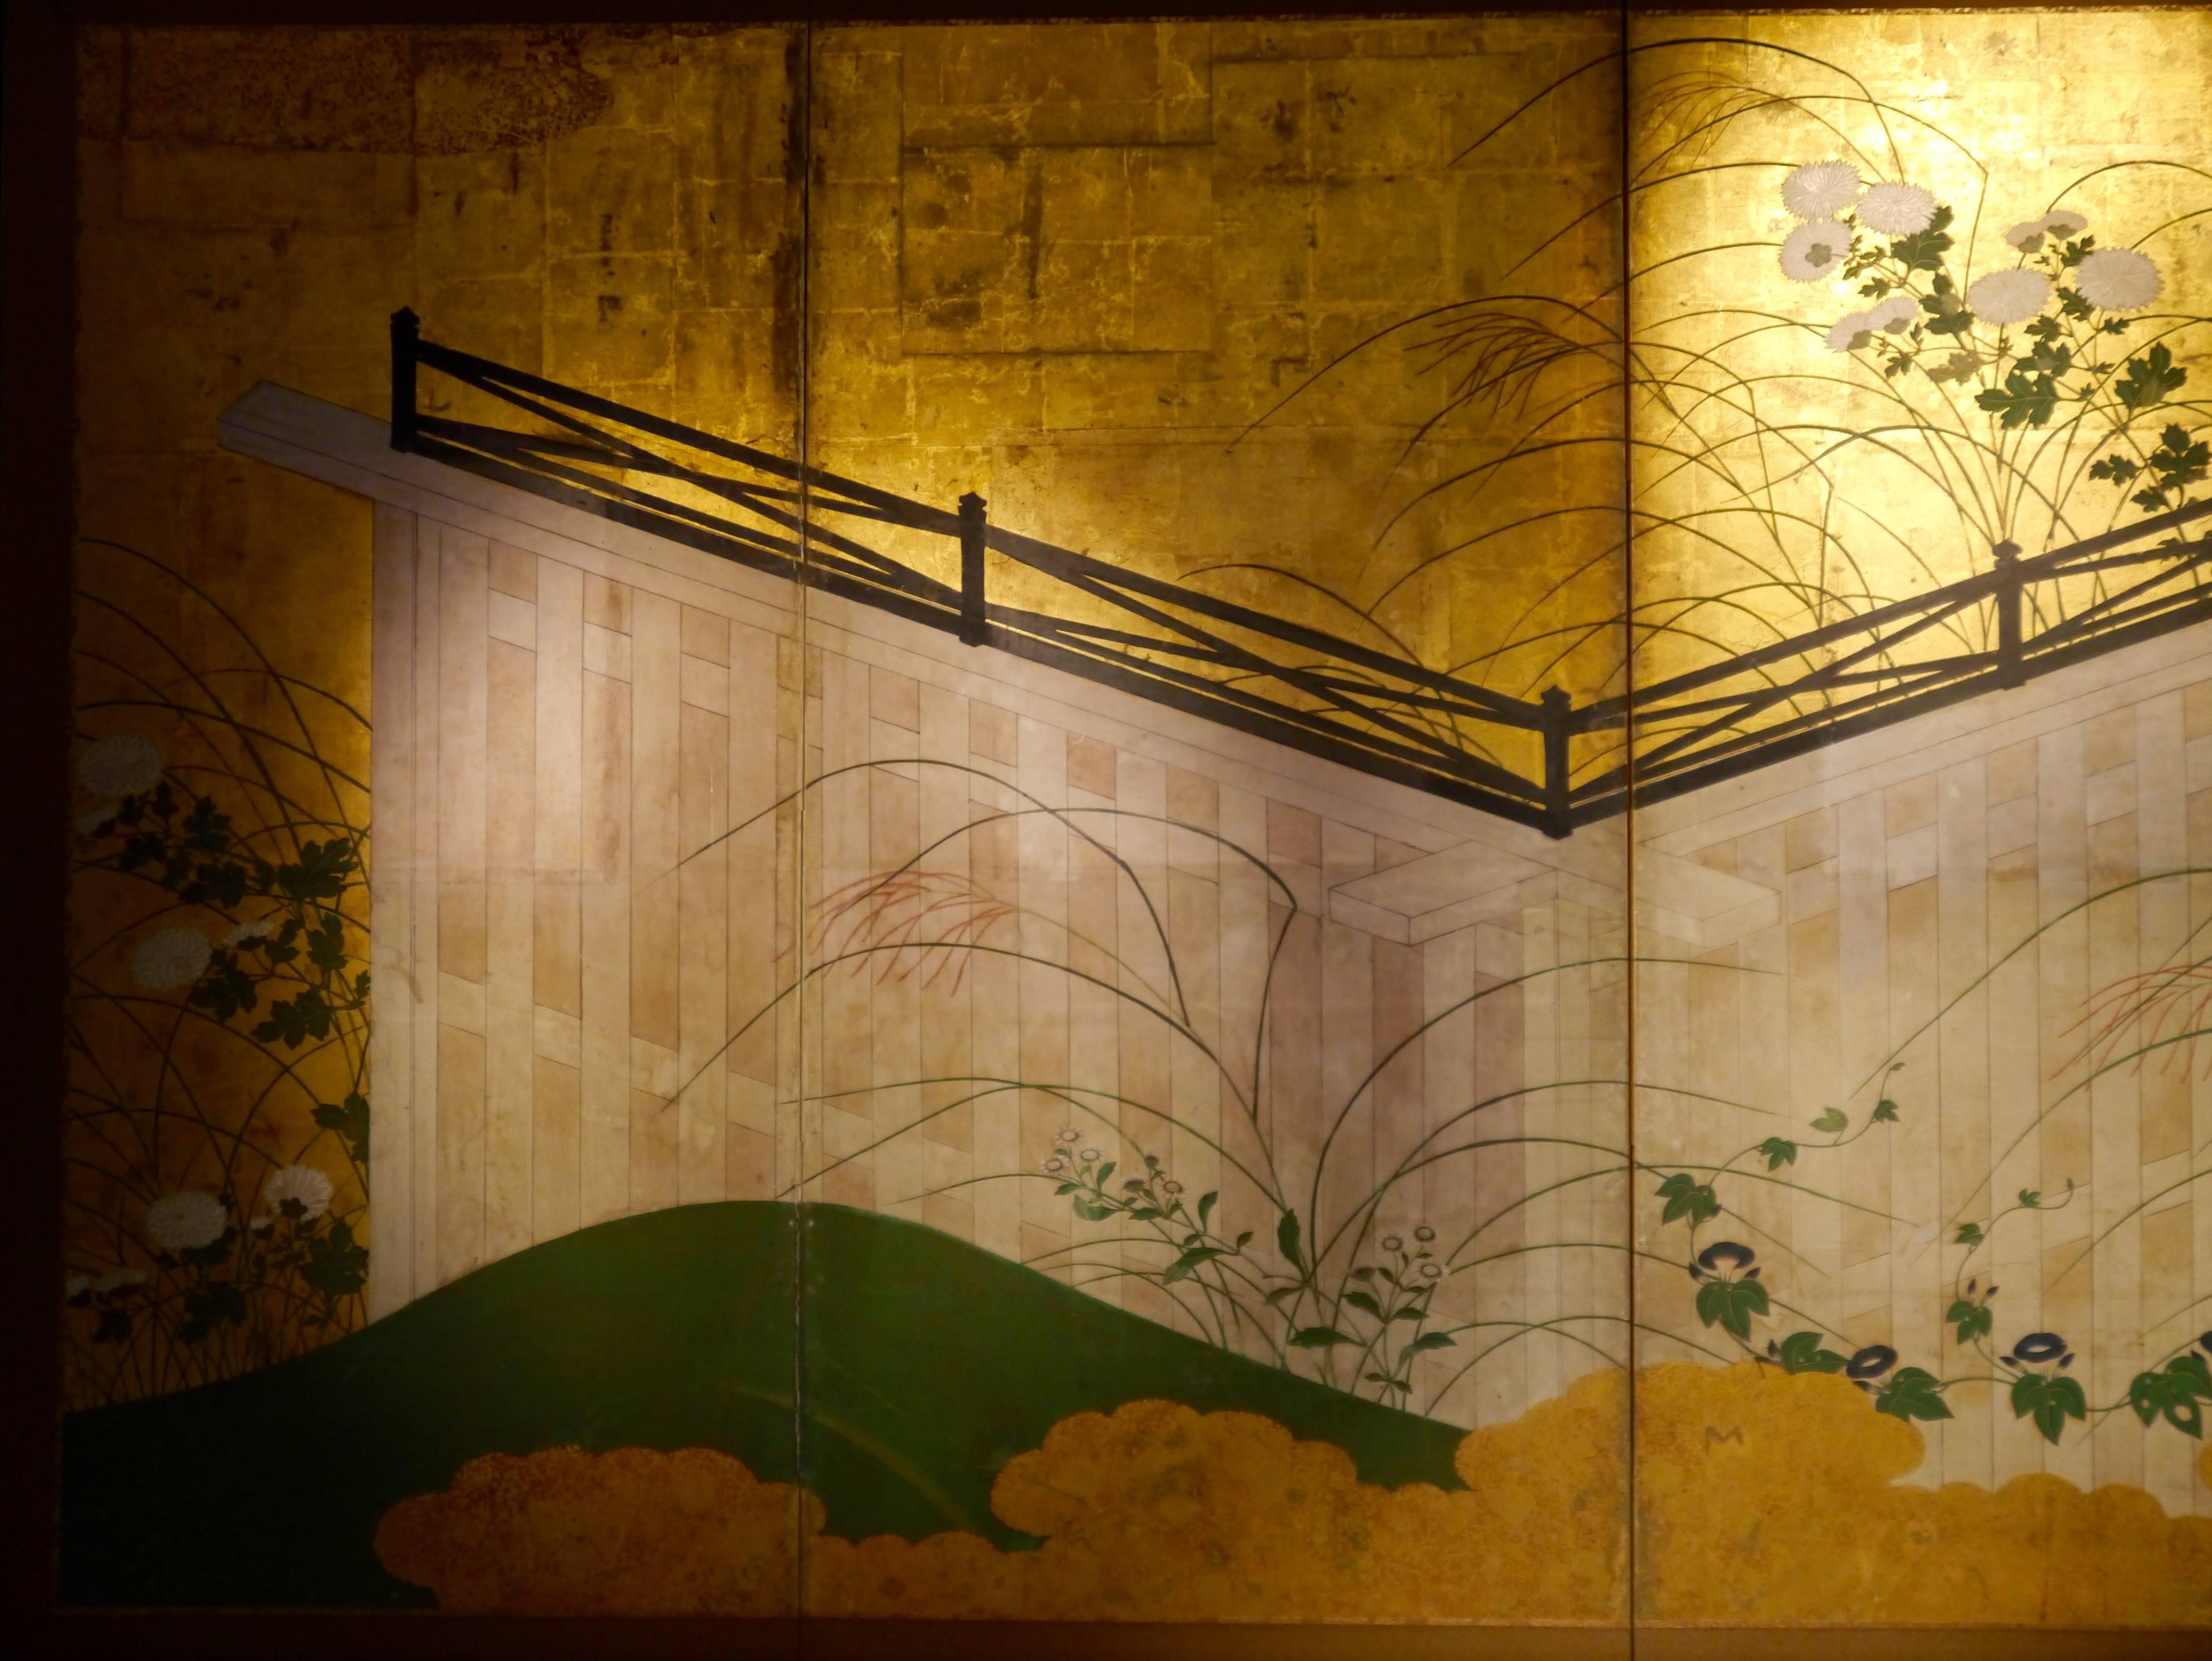 Four panels Japanese screen with wooden fence. Smooth hill covered with white chrysanthemum flowers and morning glory flowers on gold paper.